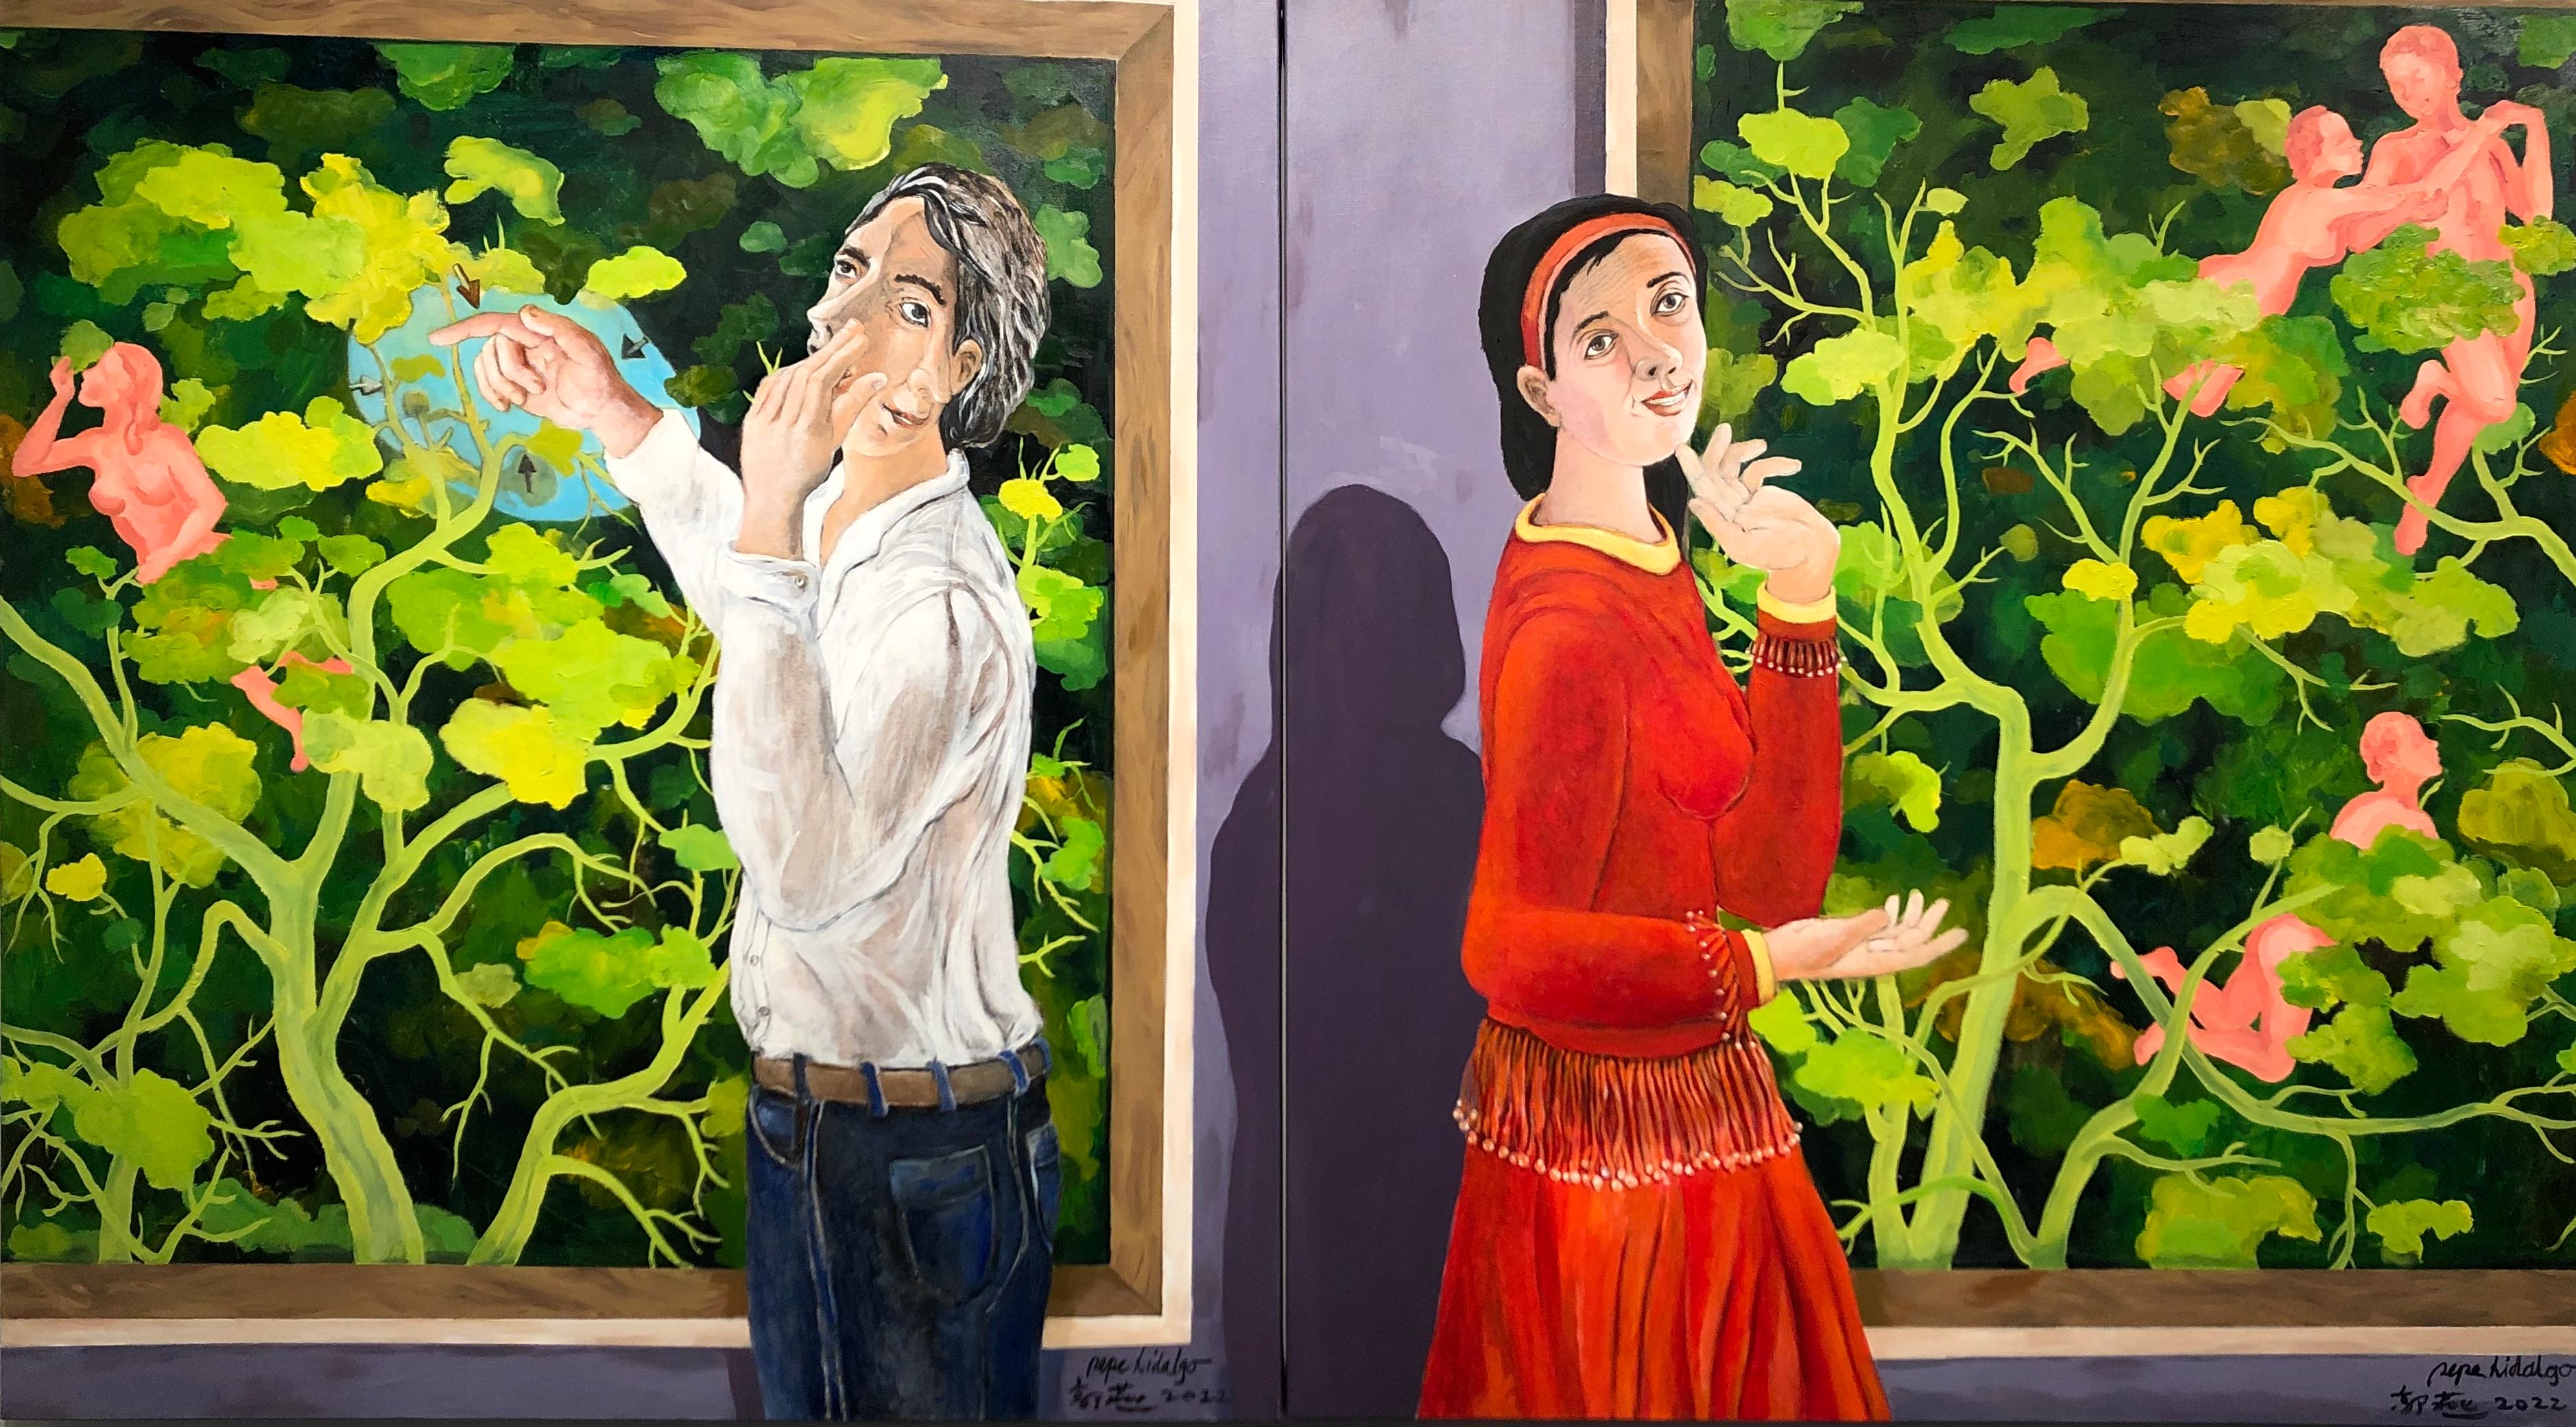 Garden in Spring (diptych) - oil and acrylic on canvas - Painting by Pepe Hidalgo and Guo Yan